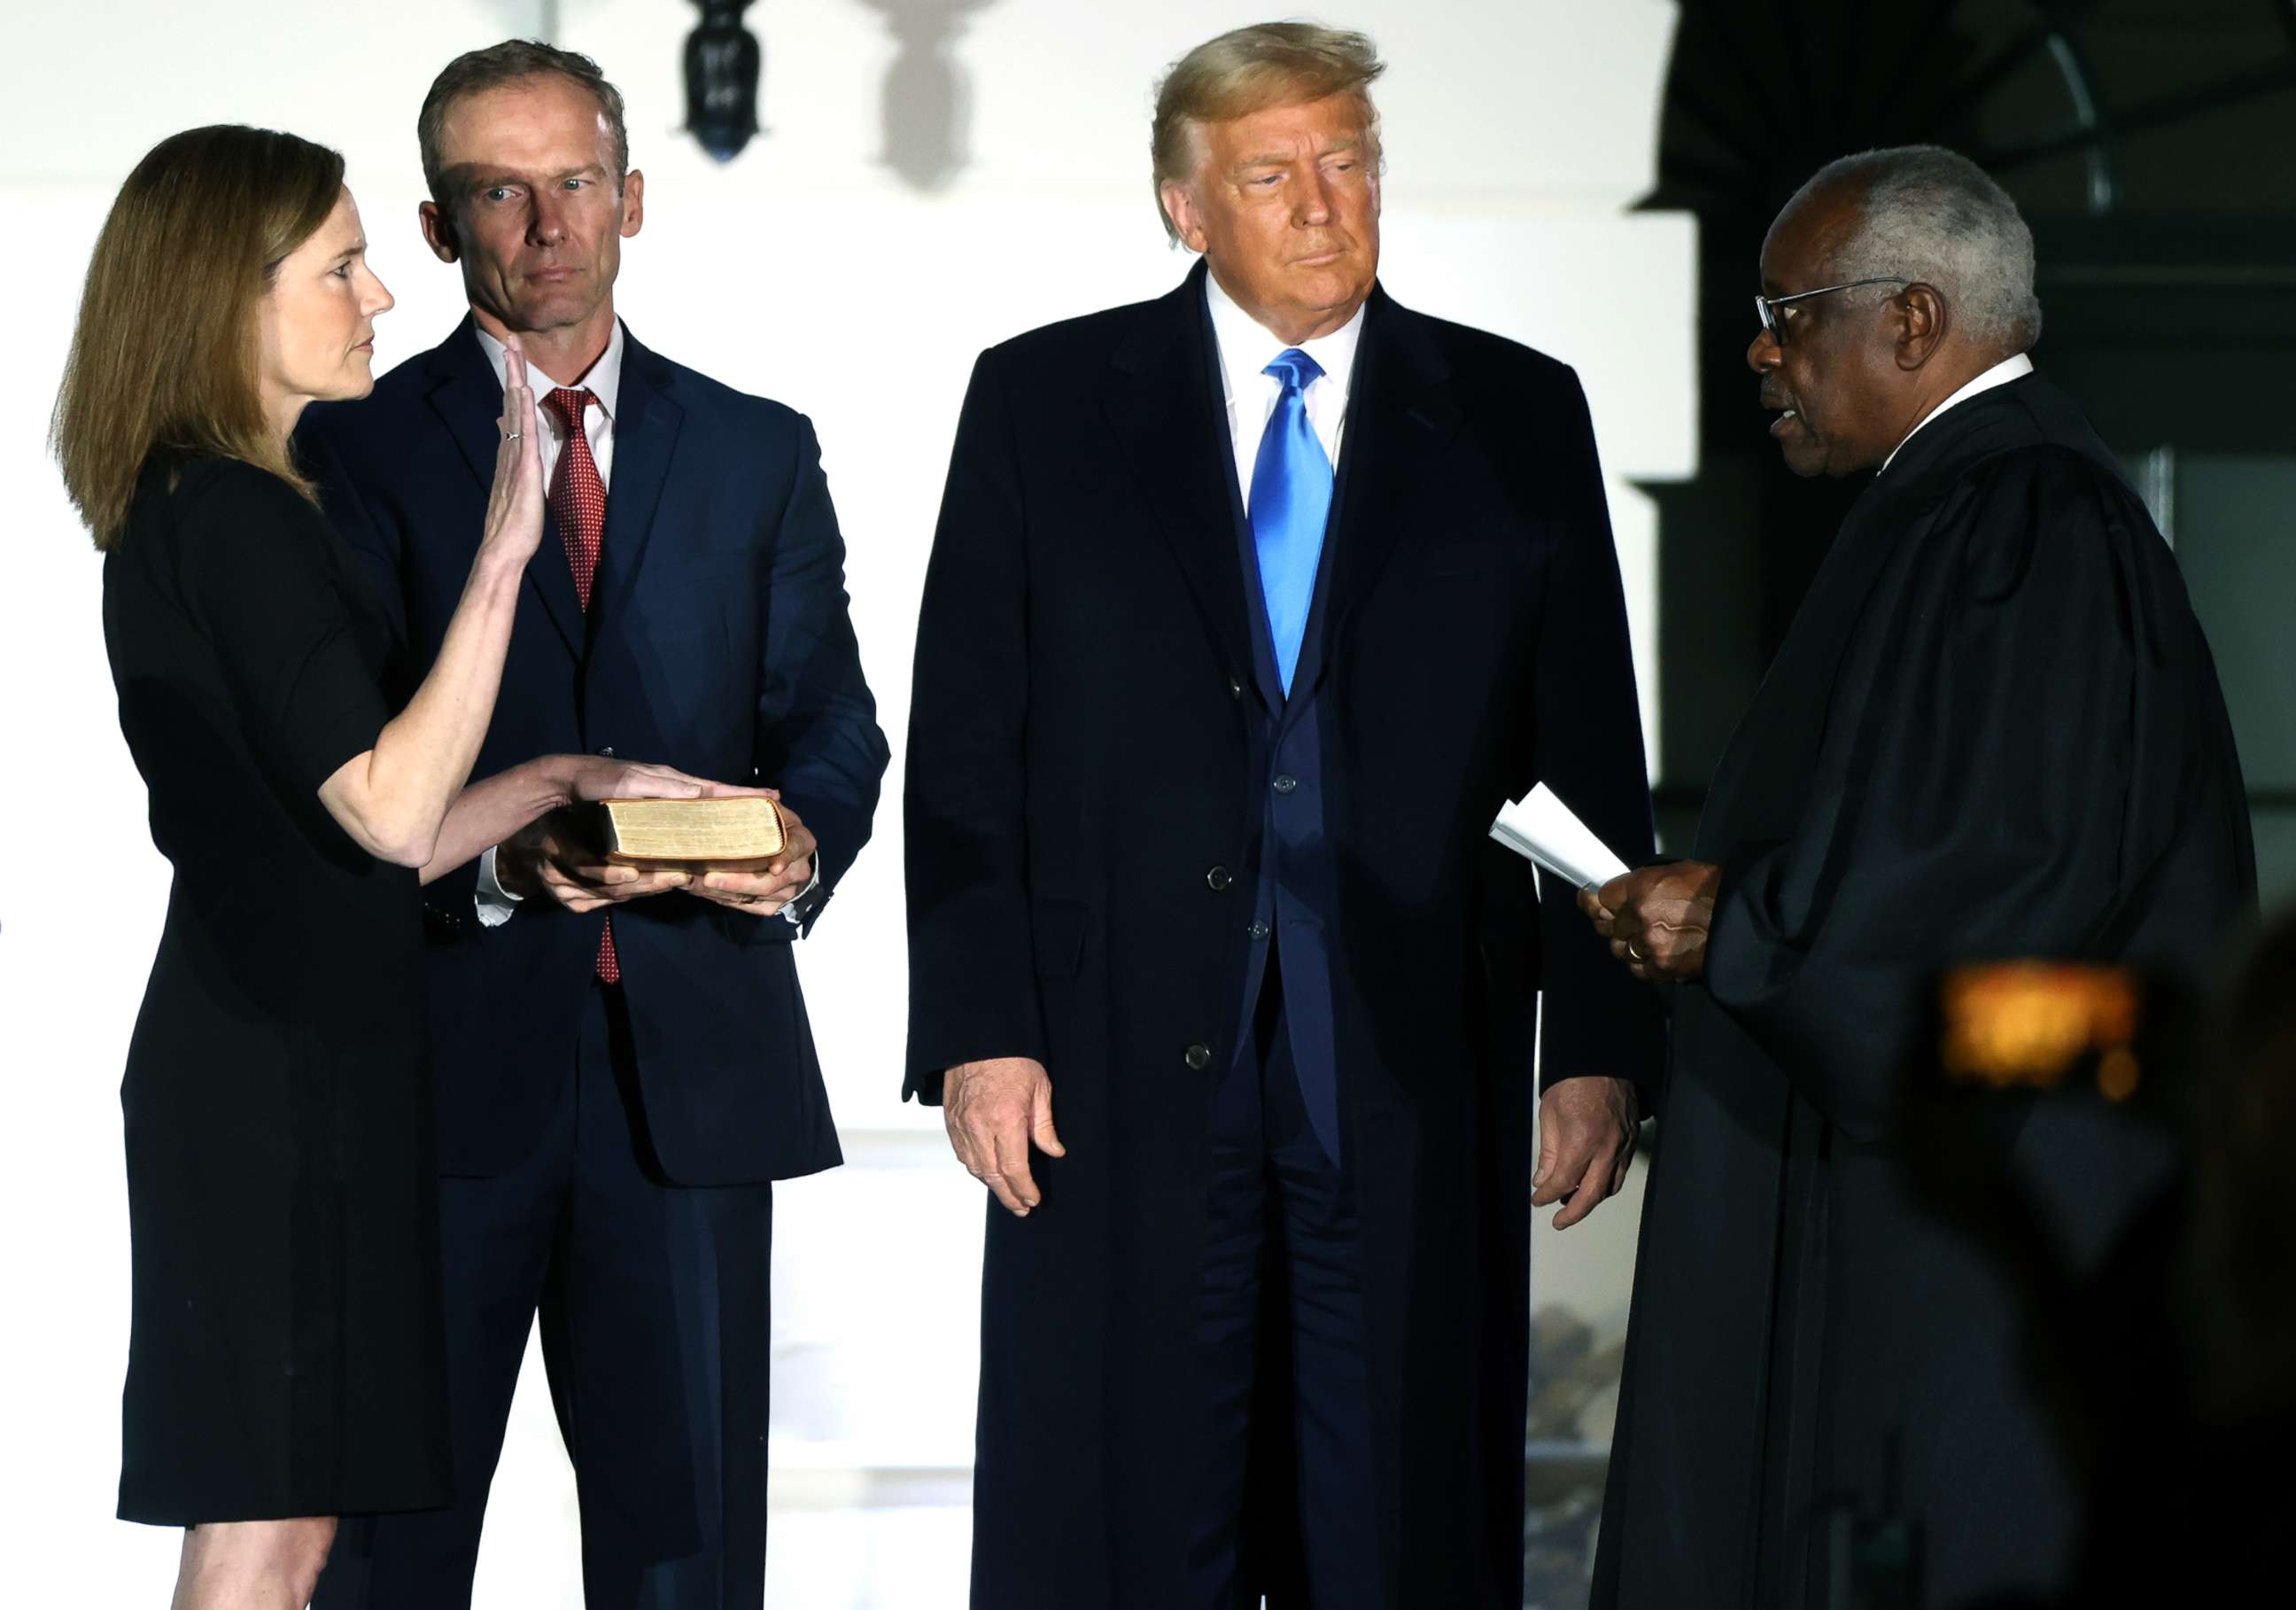 PHOTO: Judge Amy Coney Barrett is sworn in to serve as an associate justice of the Supreme Court by Supreme Court Justice Clarence Thomas as her husband Jesse Barrett and President Donald Trump watch on the South Lawn of the White House, Oct. 26, 2020.   